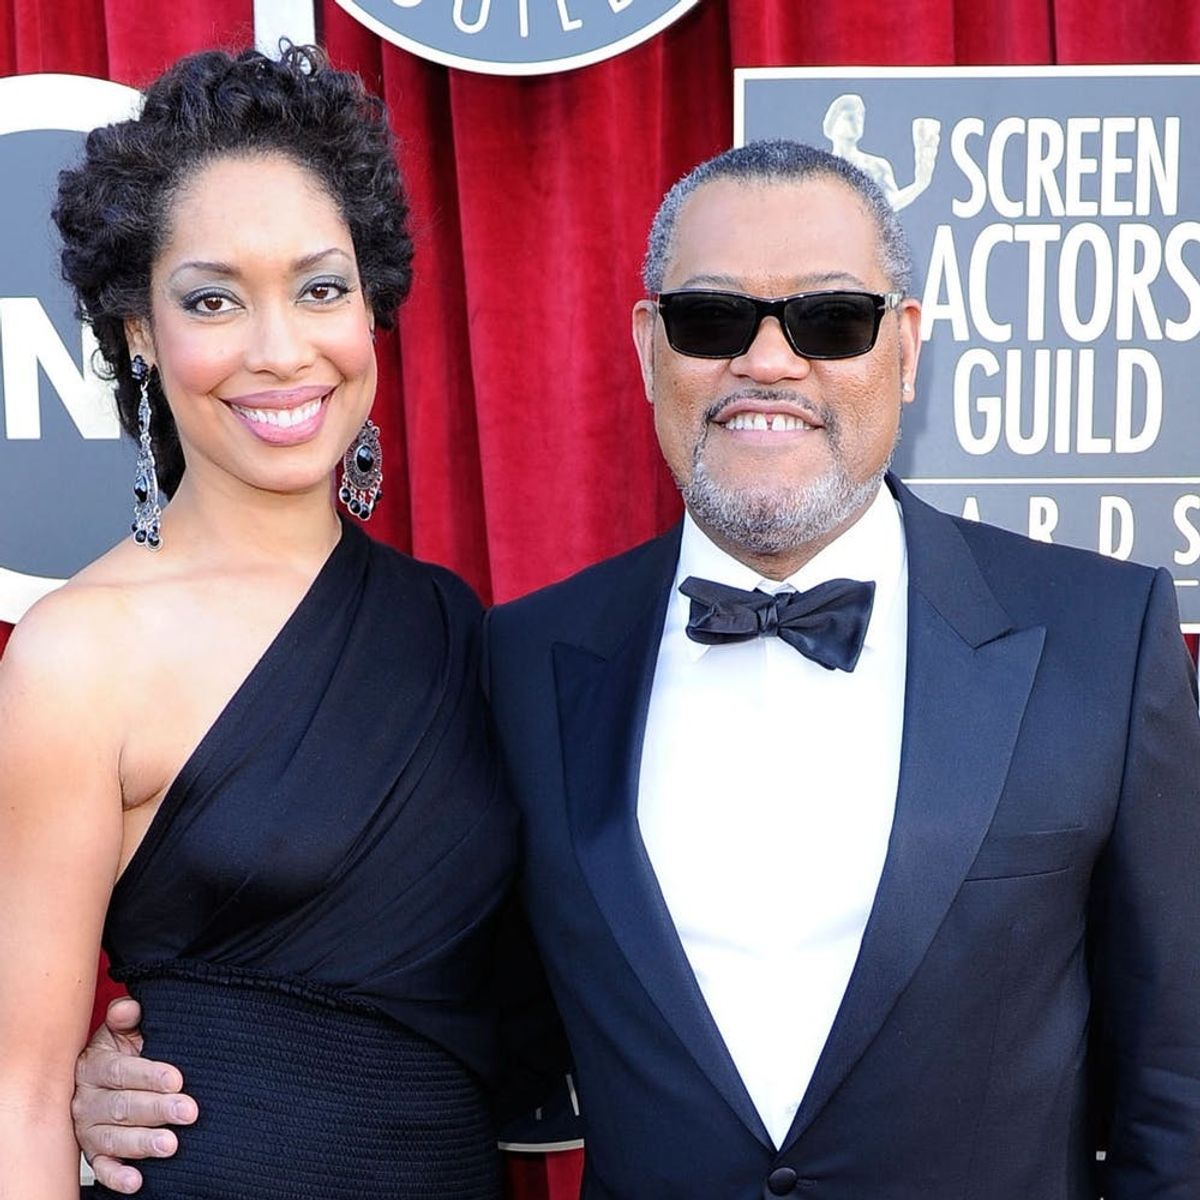 Gina Torres Confirms Split from Laurence Fishburne: “A Different Ending Than Either One of Us Had Expected”